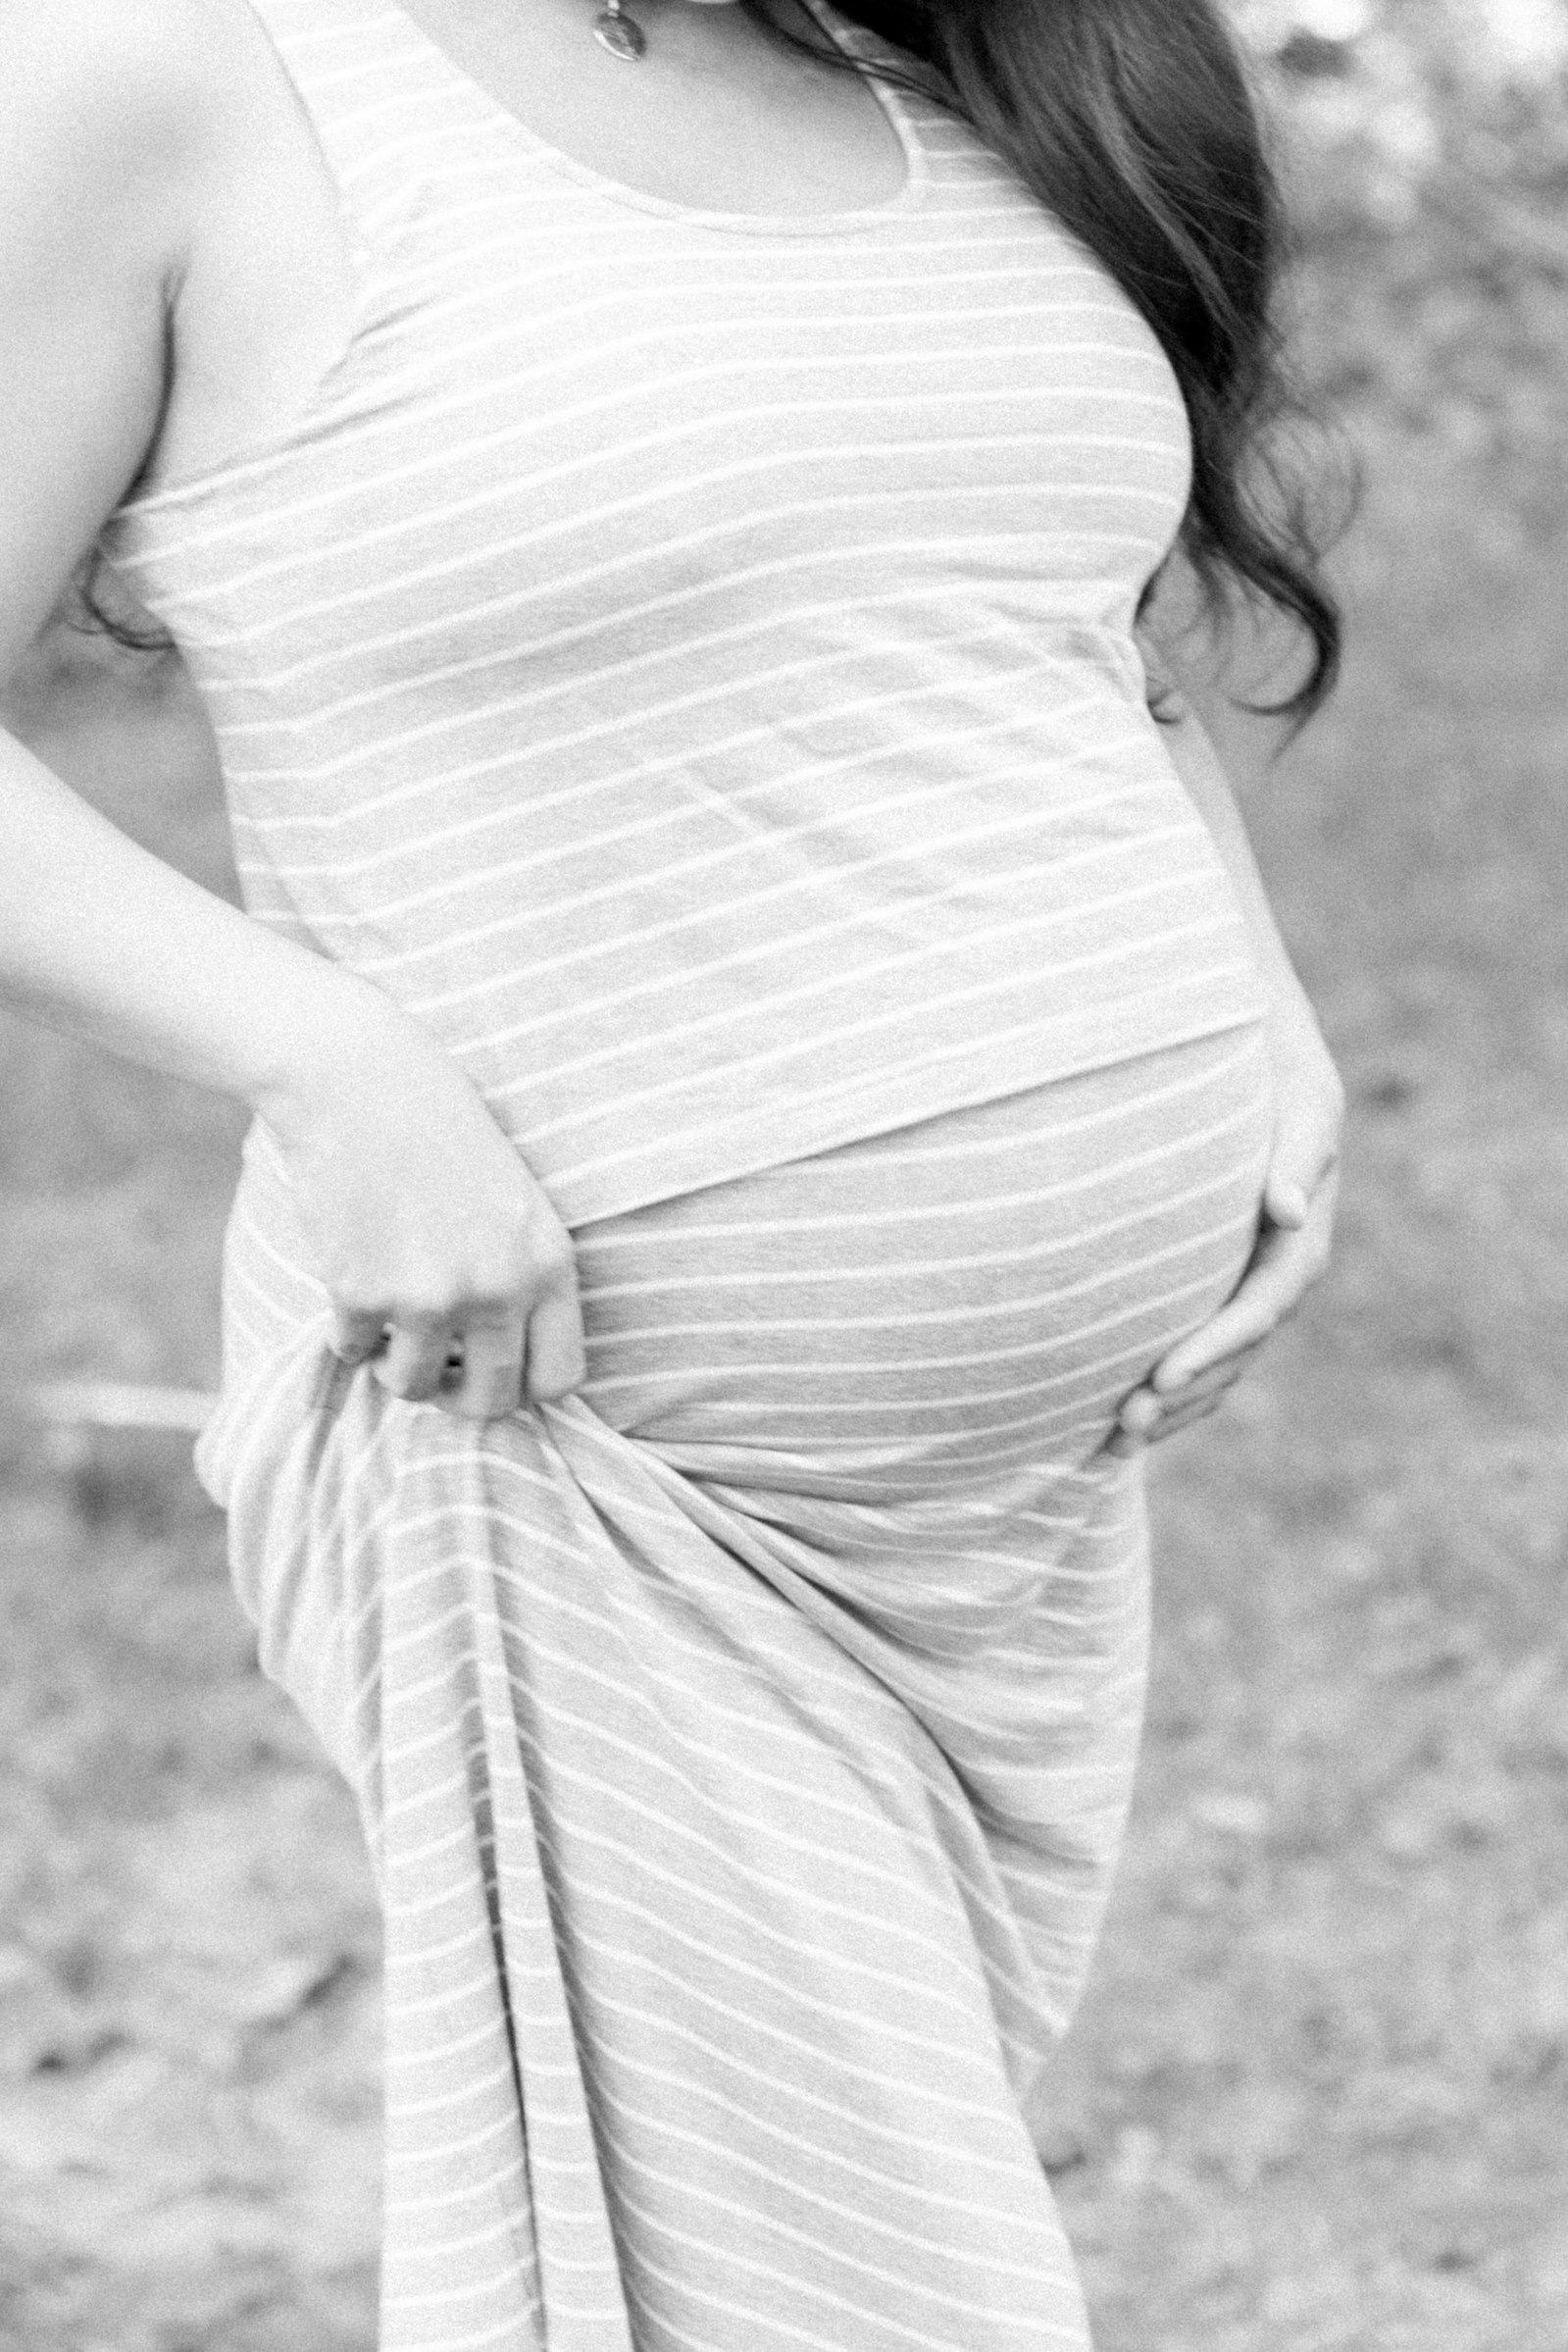 Black and white maternity portrait of a woman holding her belly, Emily VanderBeek Photography, Portrait and Family Photography, Niagara Photographer, Champlain Photographer, Vaudreuil-Soulanges Photographer, candid photography, authentic photography.